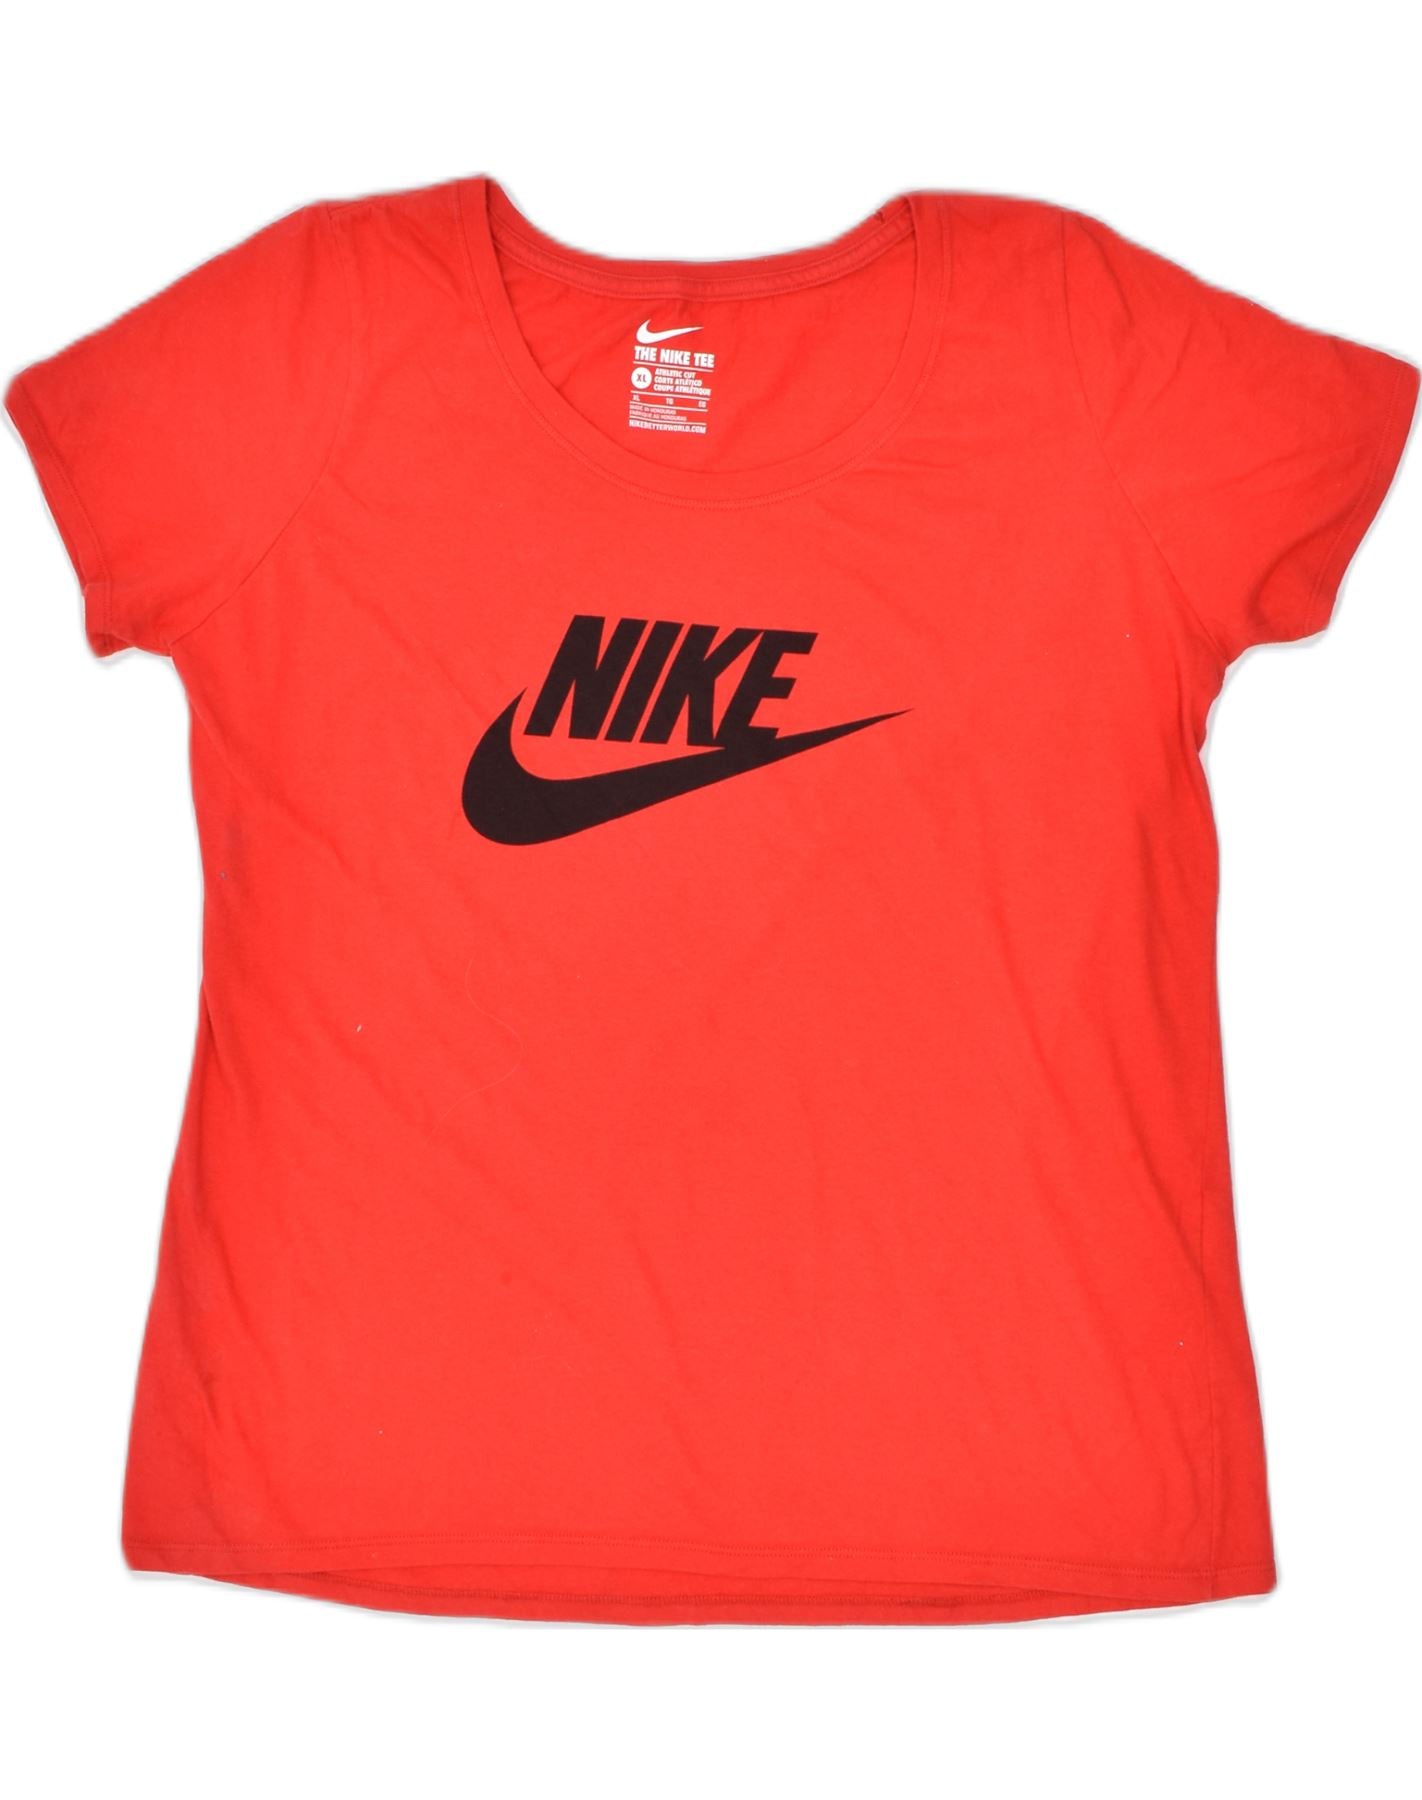 NIKE Womens Athletic Cut Graphic T-Shirt Top UK 18 XL Red Cotton